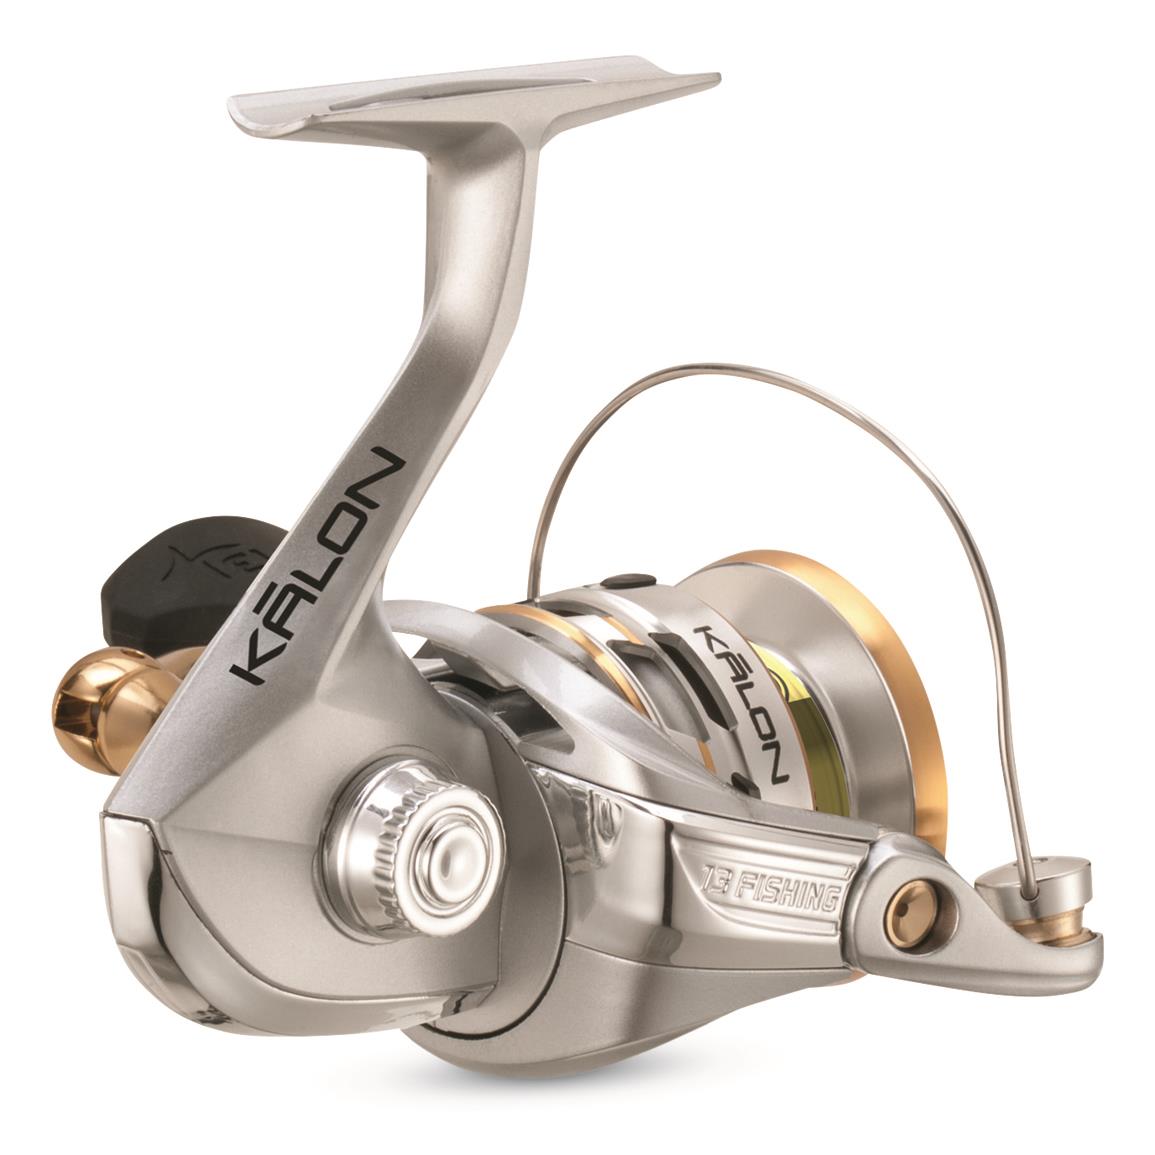 Daiwa Procyon MQ LT Spinning Reel, 1000 Reel Size, 5.1:1 Gear Ratio -  730673, Spinning Reels at Sportsman's Guide